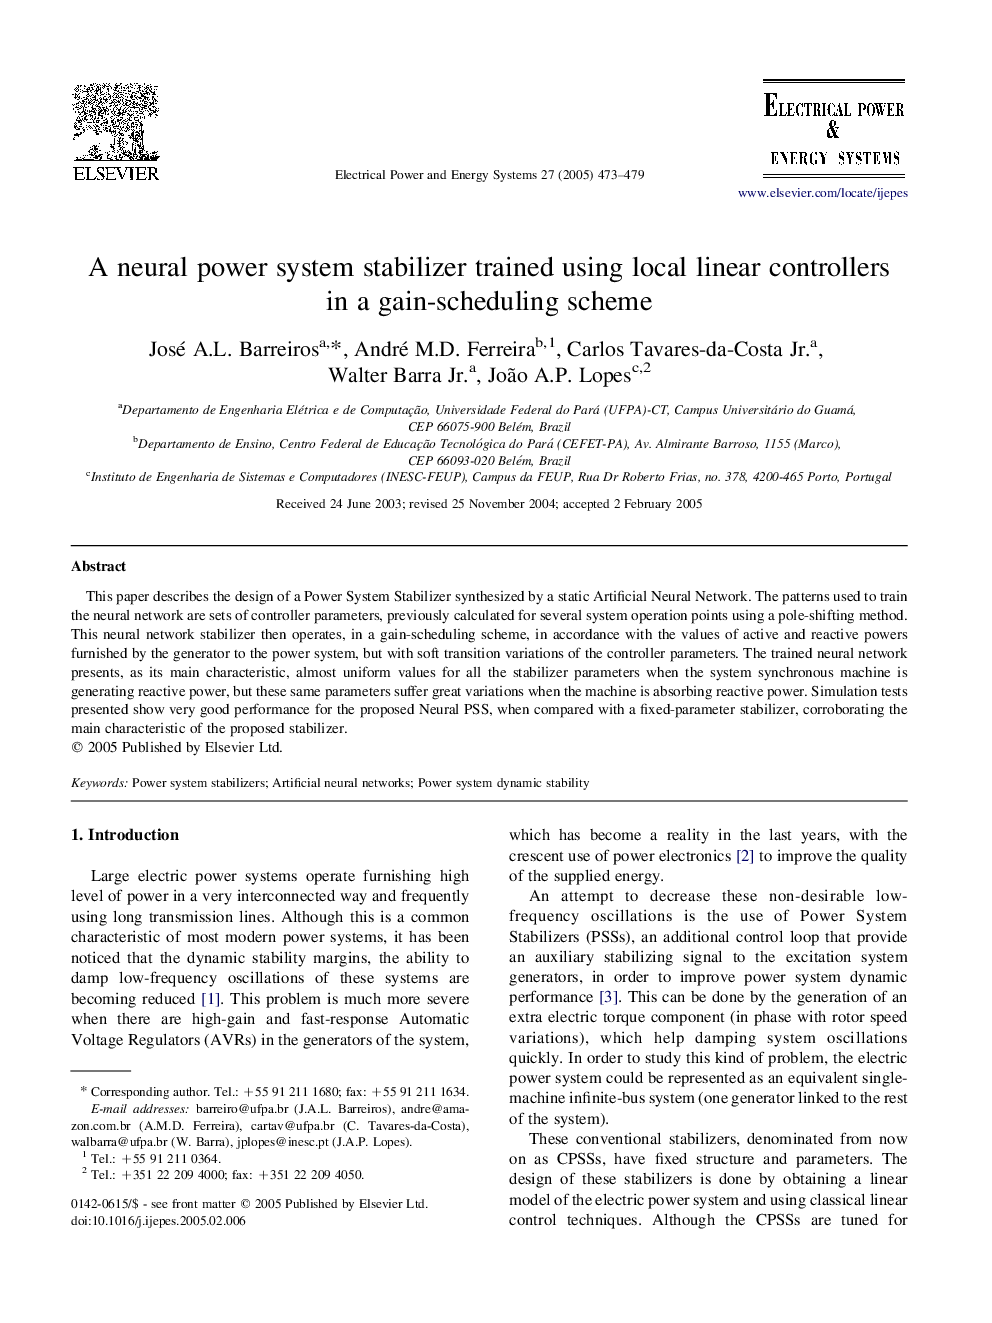 A neural power system stabilizer trained using local linear controllers in a gain-scheduling scheme